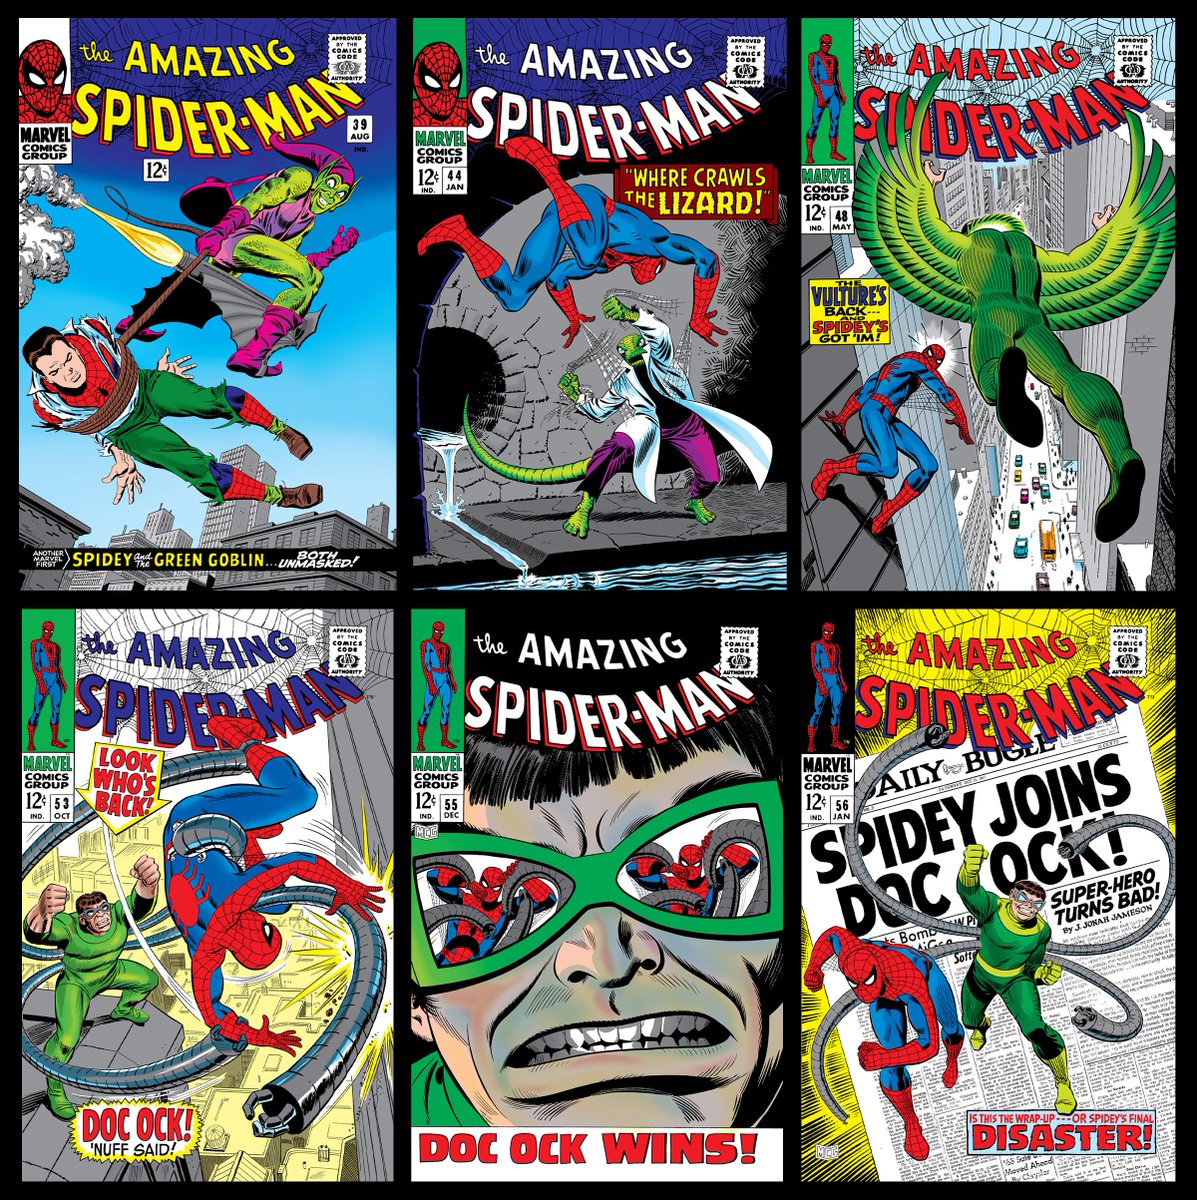 I love all the John Romita's Spider-Man artwork and covers, but these 6 maybe my favorite. He will always be the G.O.A.T. Spidey artist to me.

#SpiderMan #RIP #JohnRomitaSr #Marvel #MarvelComics #comicart #comicbookart #comicbook #comicbooks